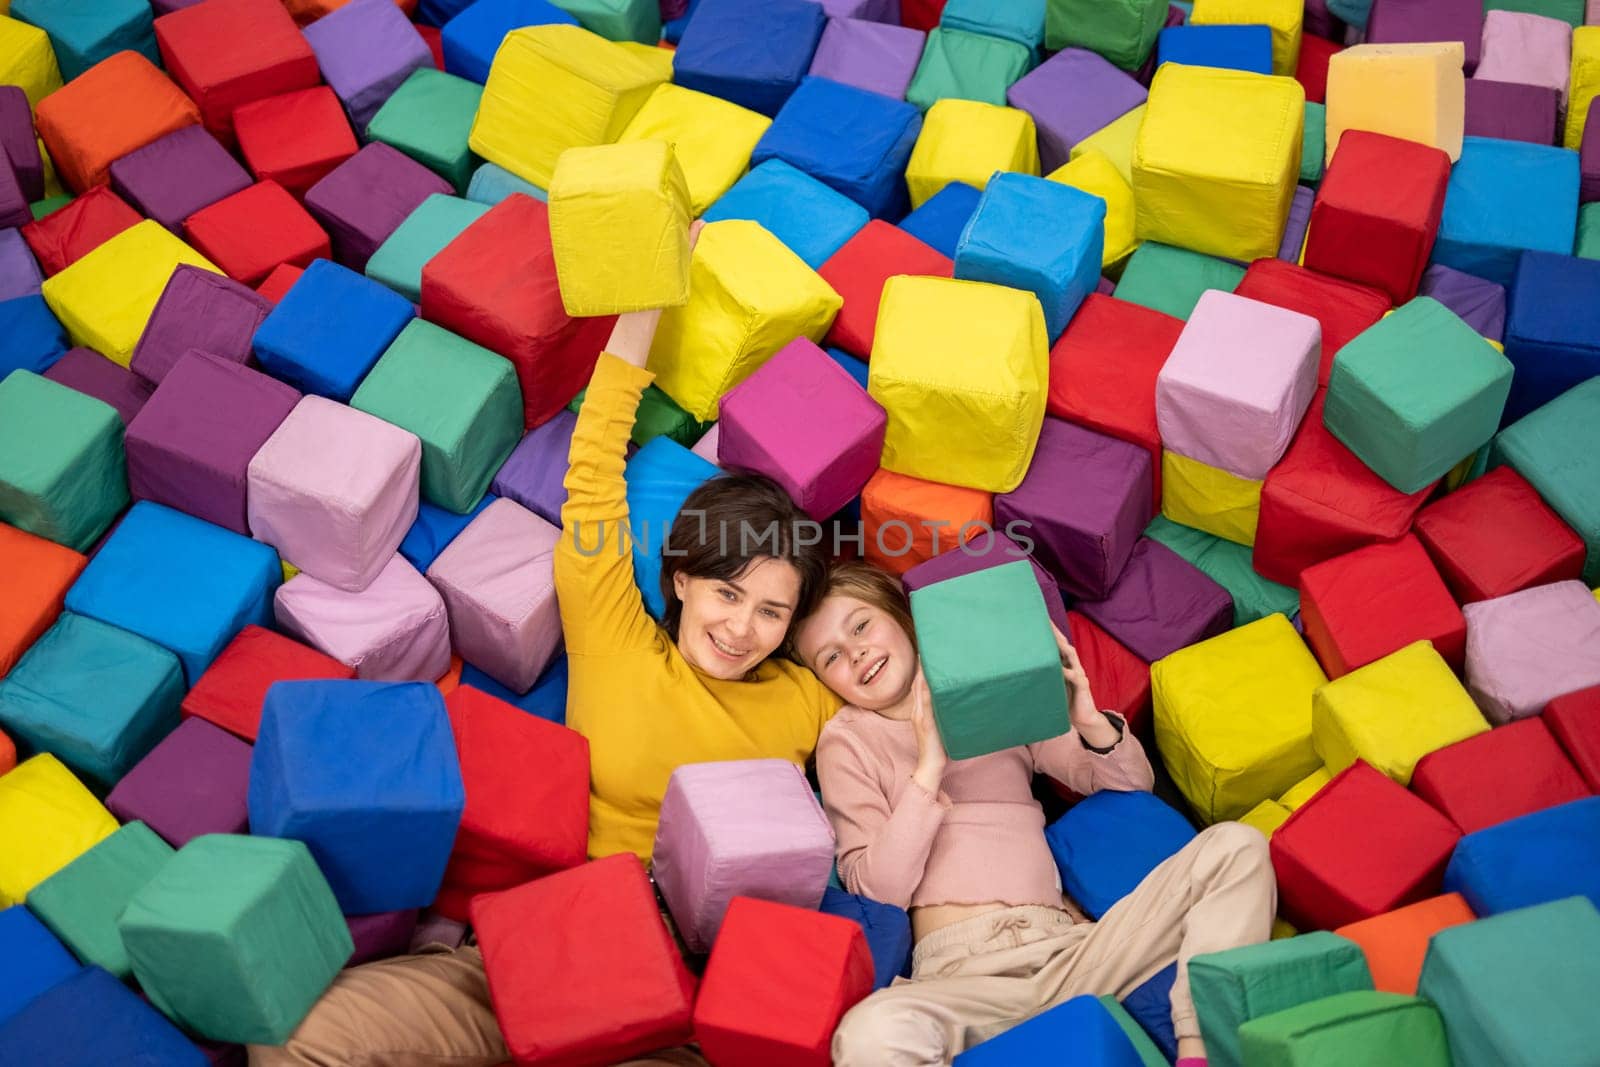 Pretty girl on trampoline holding colorful cube and smiling. Young woman happy during entertaiments at playground park